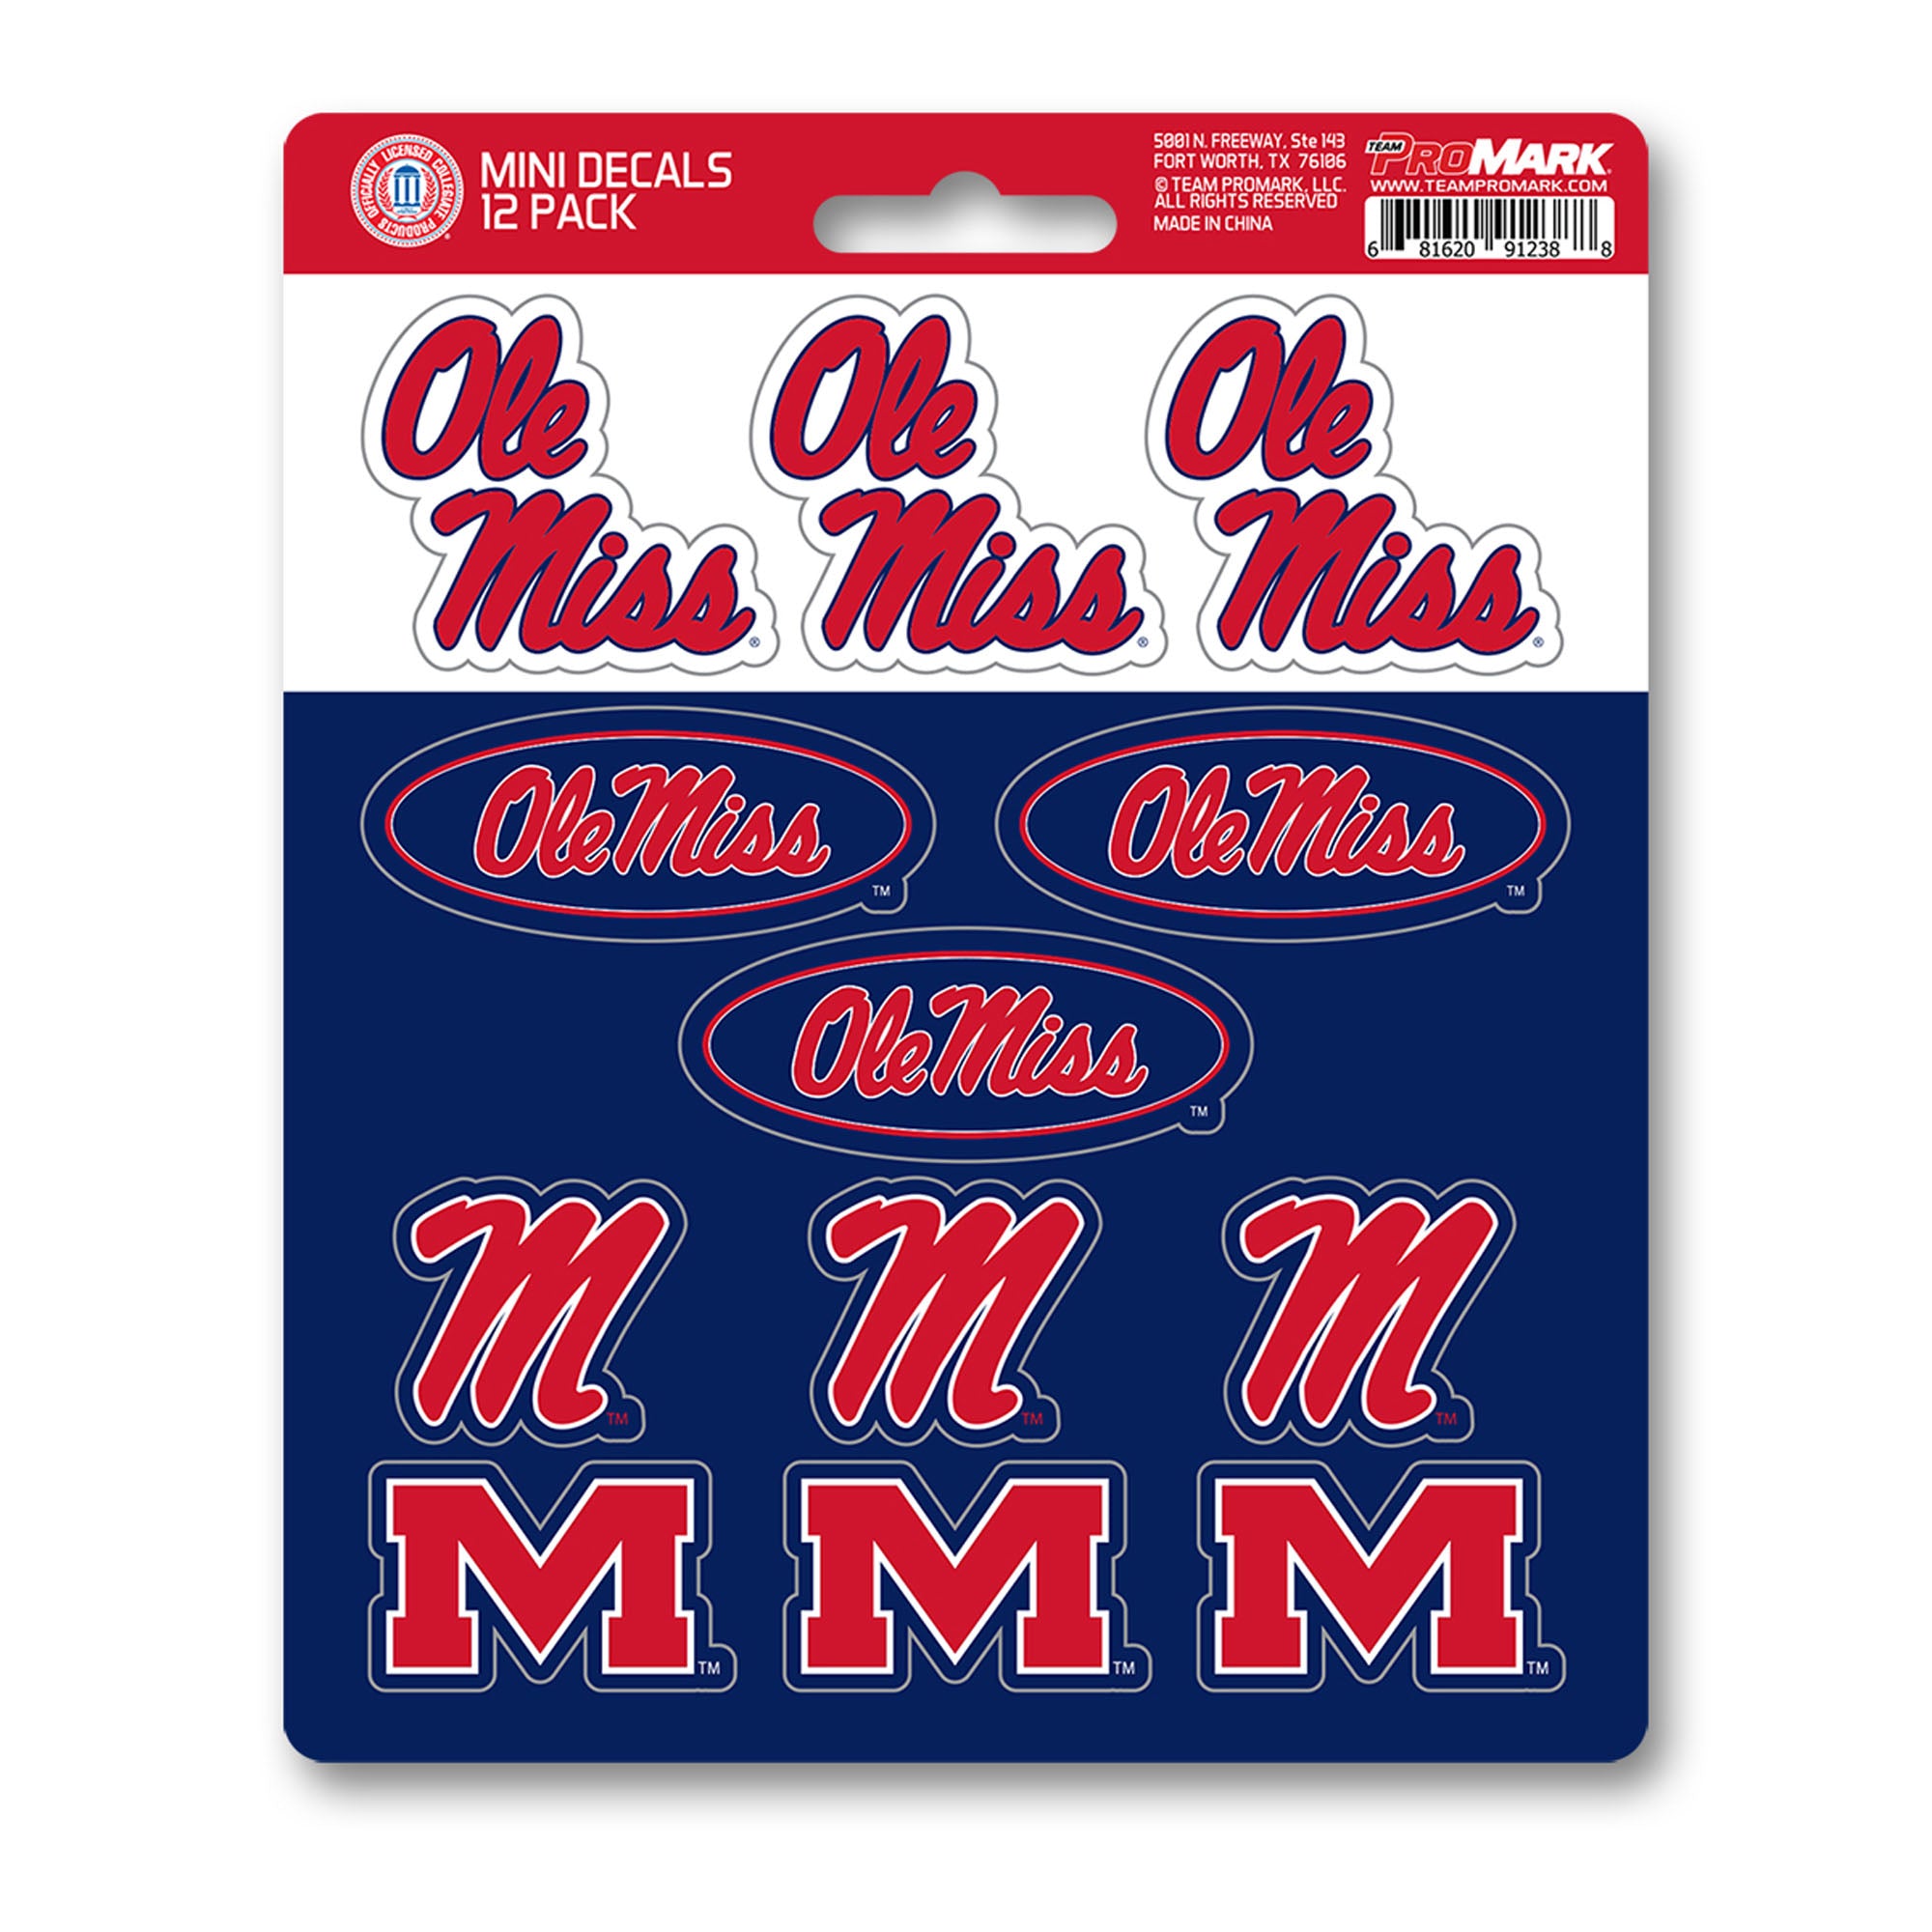 FANMATS, University of Mississippi (Ole Miss) 12 Count Mini Decal Sticker Pack